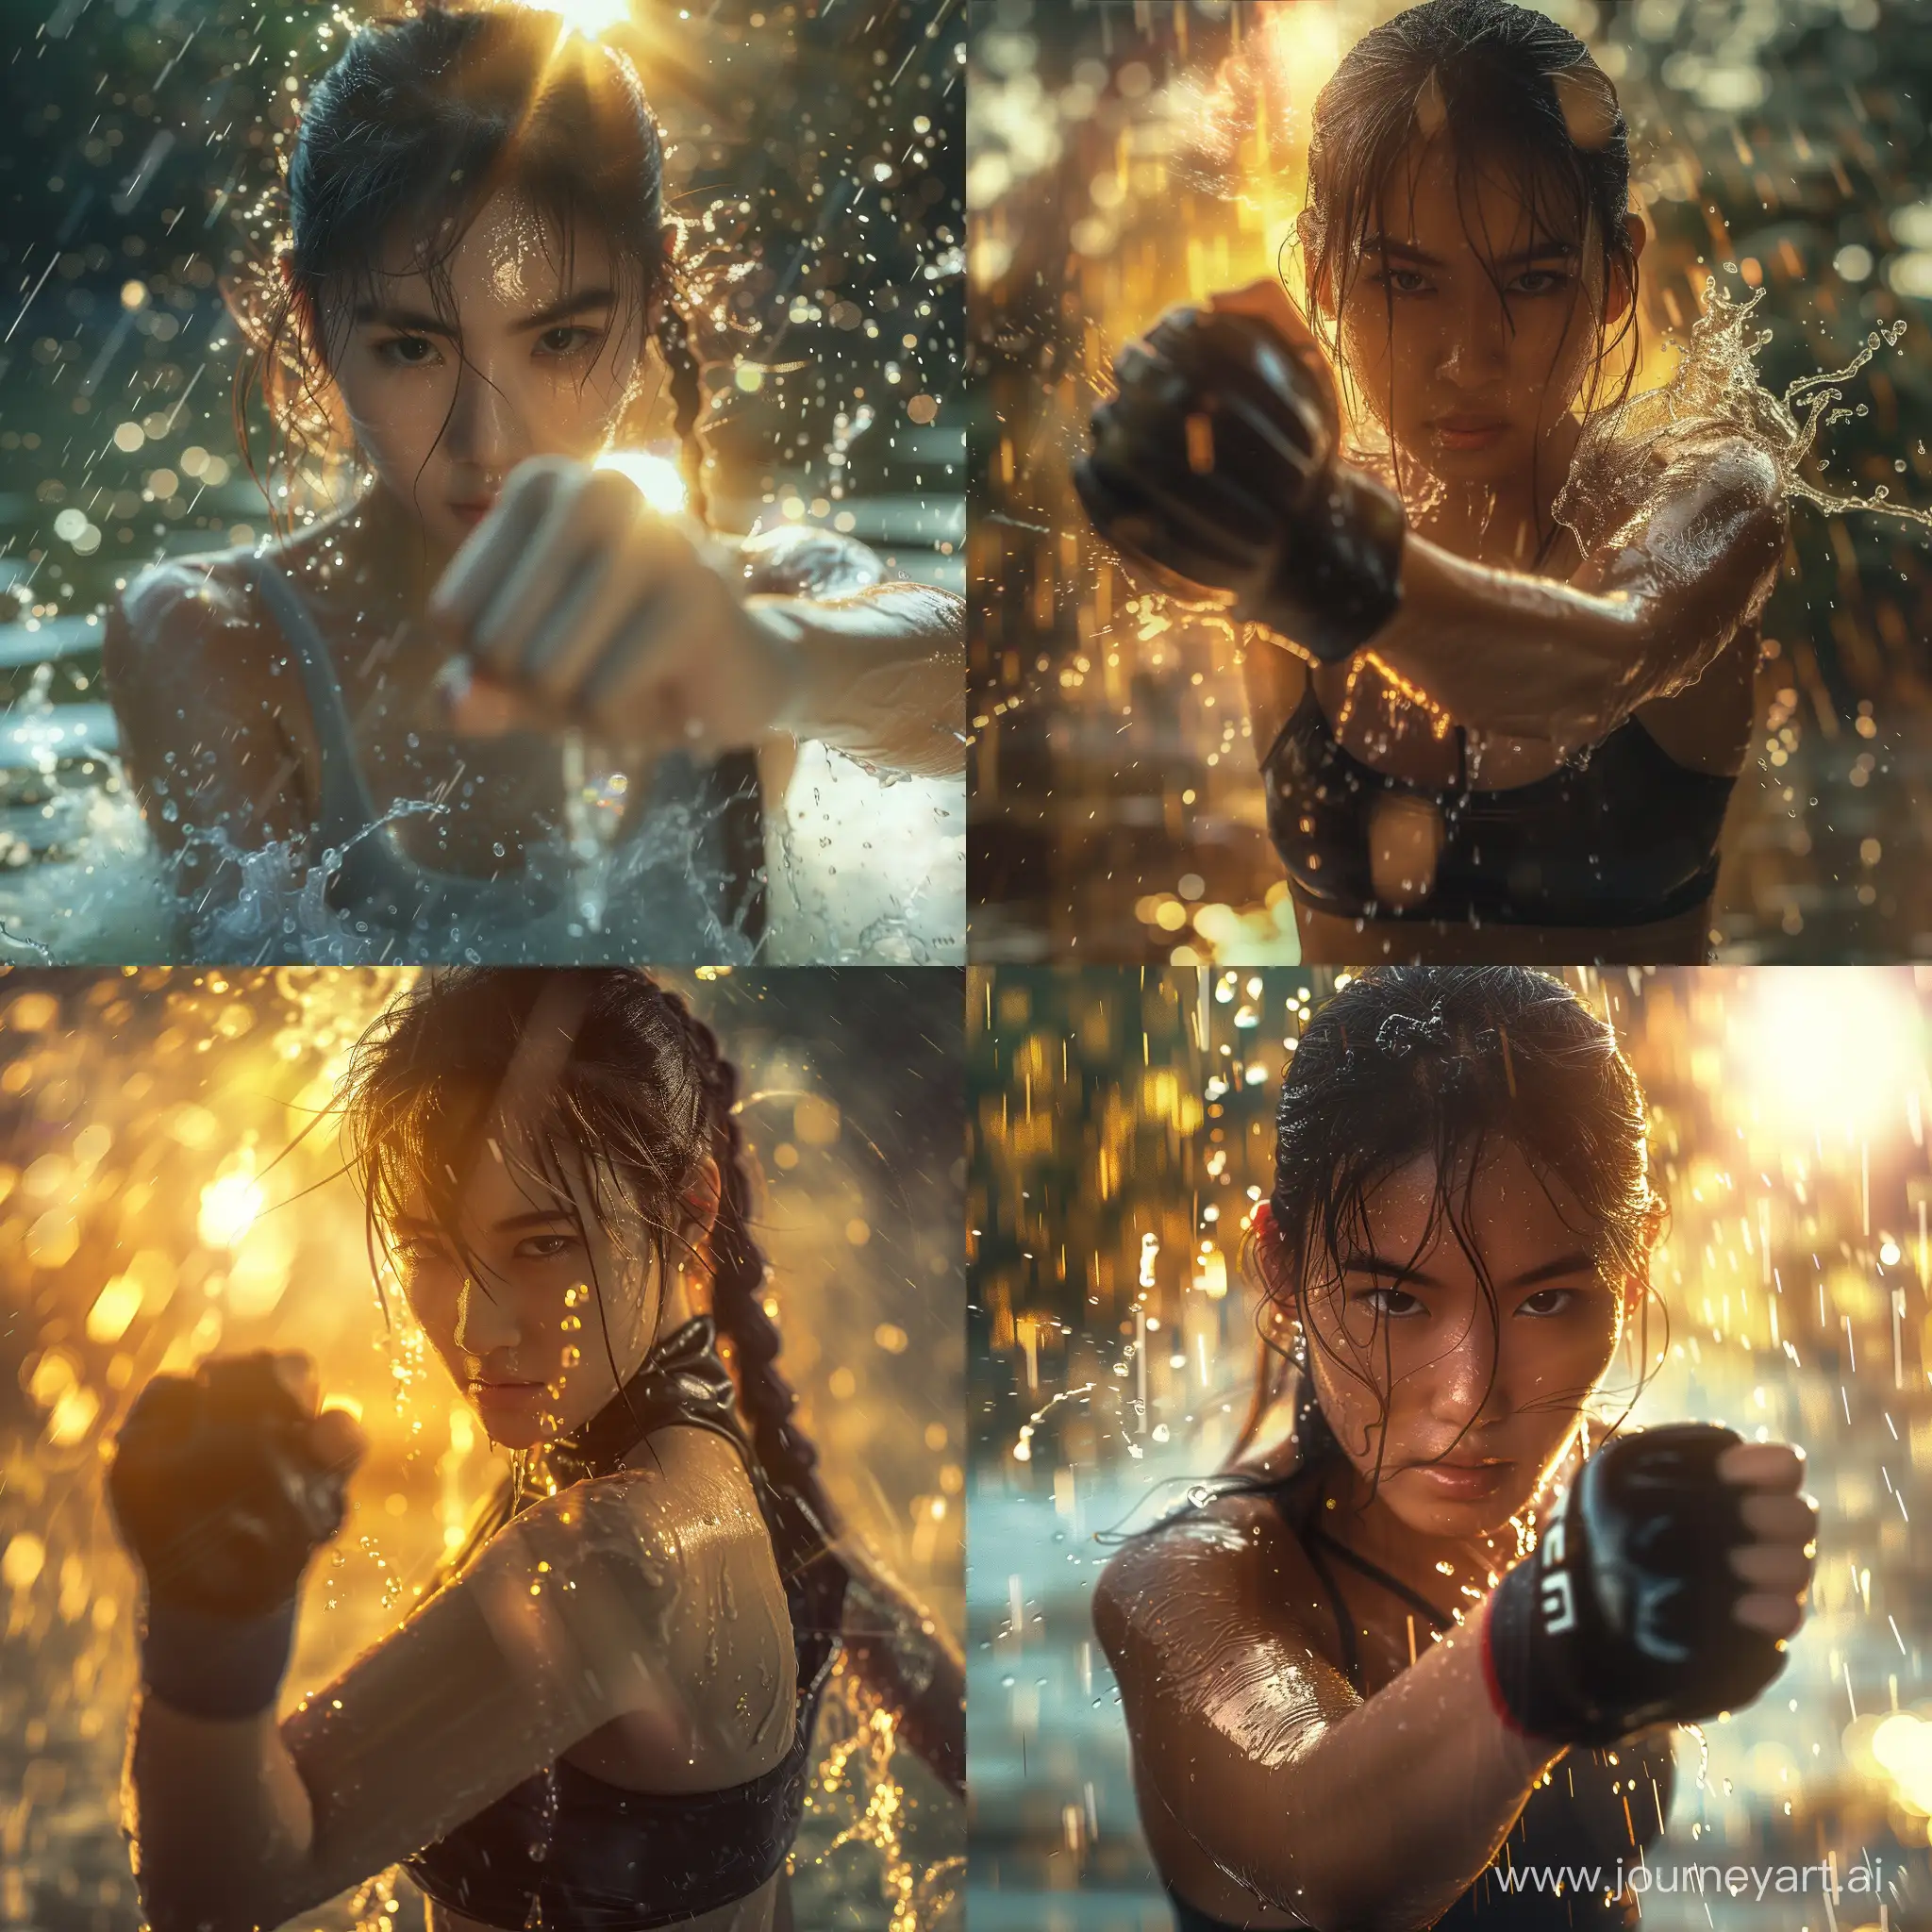 Asian-Woman-in-Street-Fighter-Yoga-Cosplay-Punching-Through-Rain-in-Tropical-Rainforest